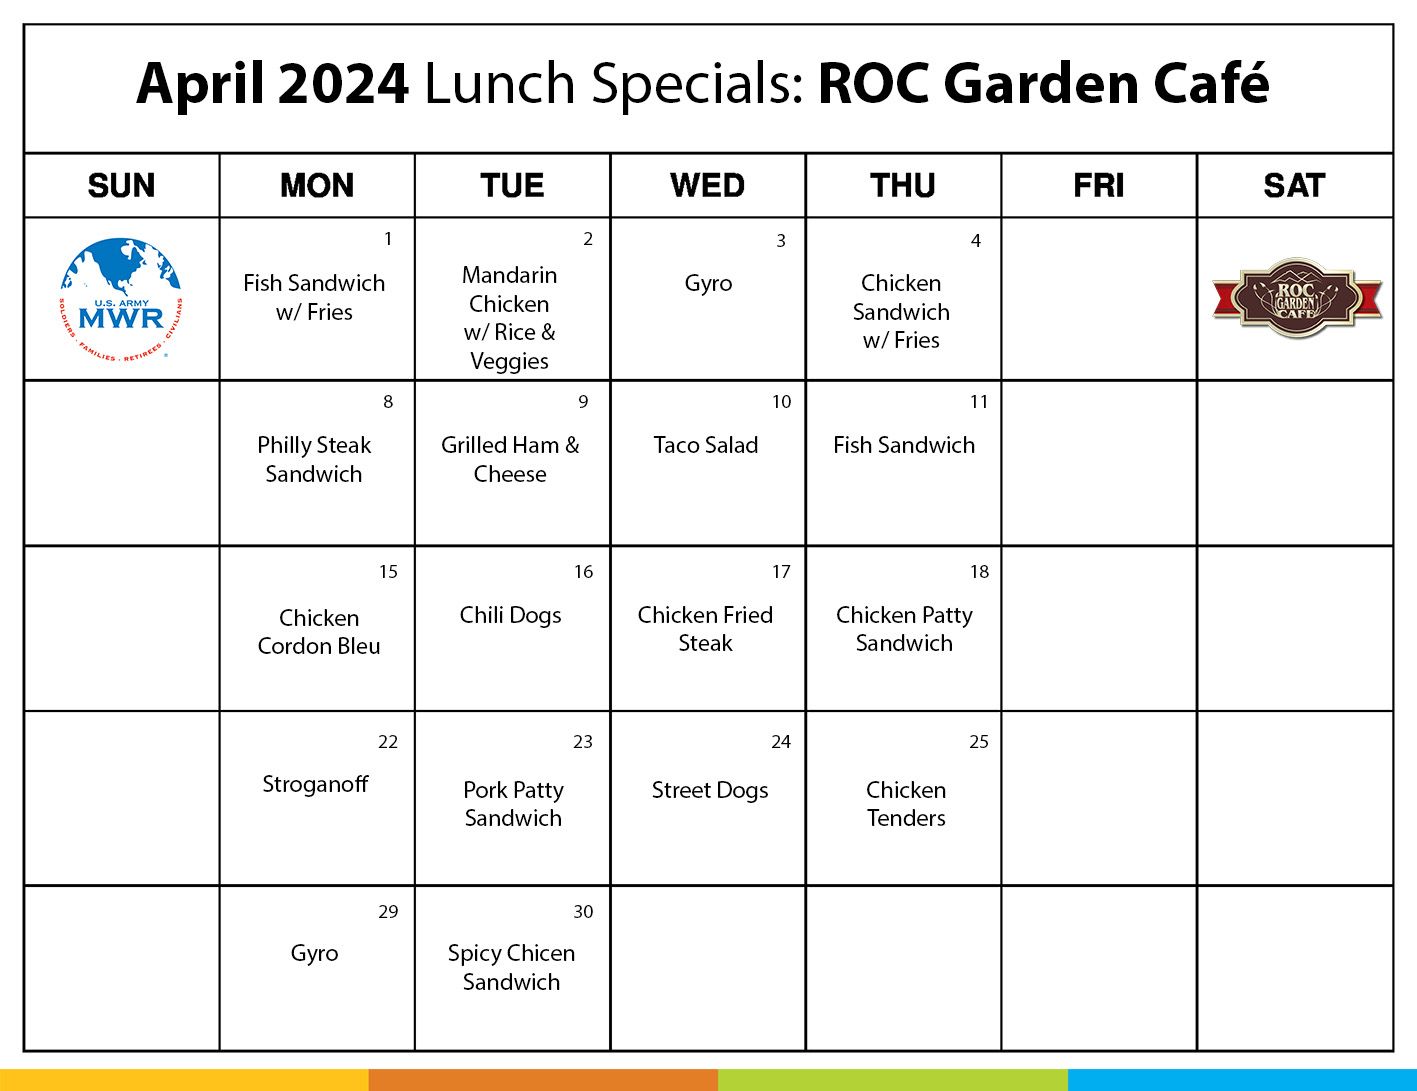 YPG_The ROC_April Lunch Special_2024.jpg